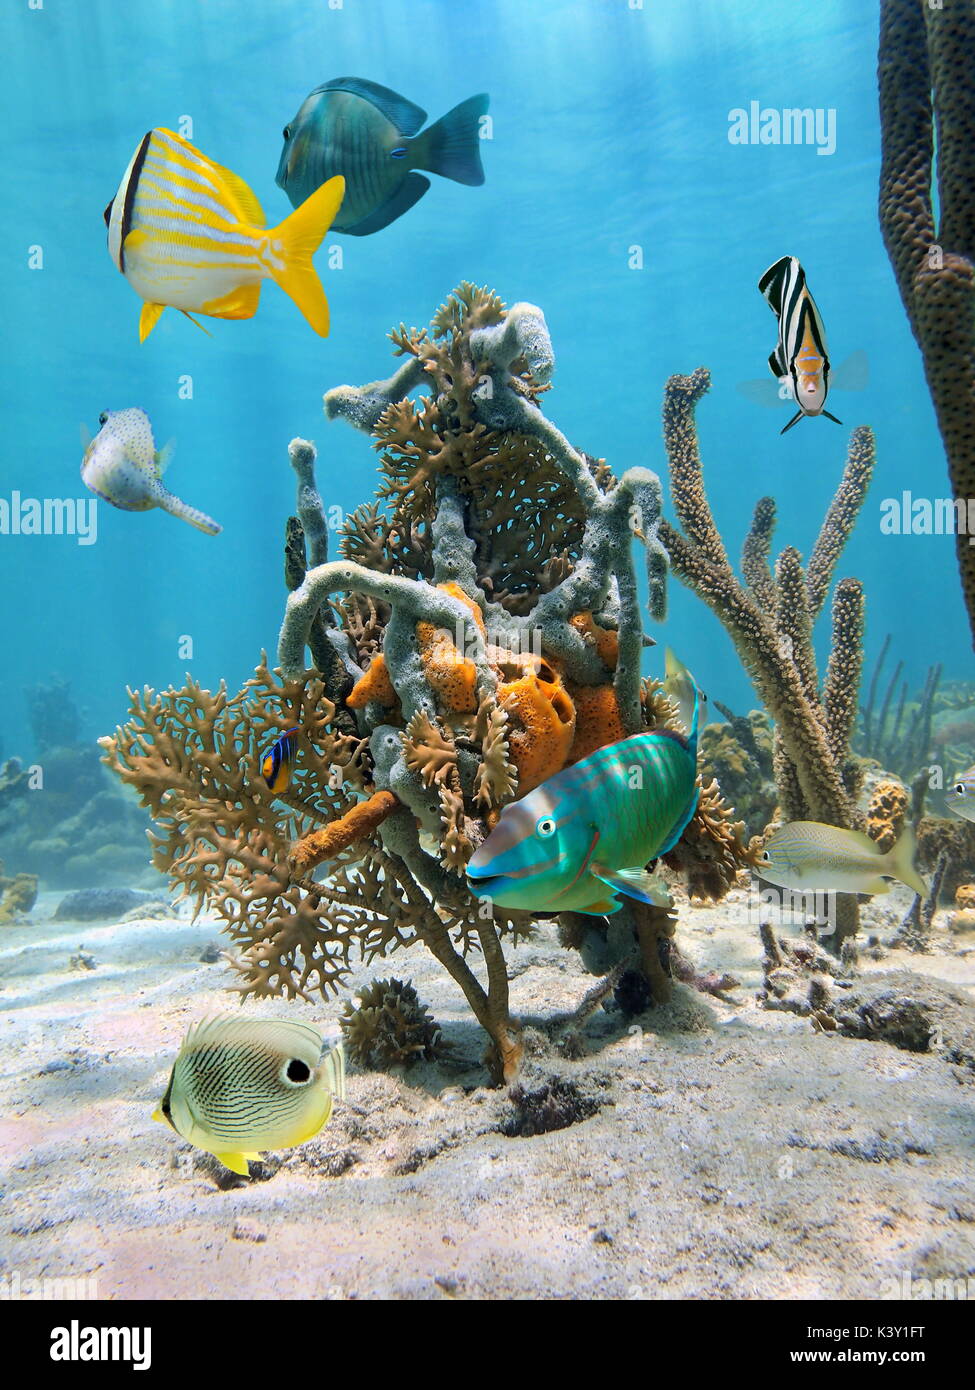 Underwater life in the Caribbean sea with tropical fish and sponges tangled with coral Stock Photo